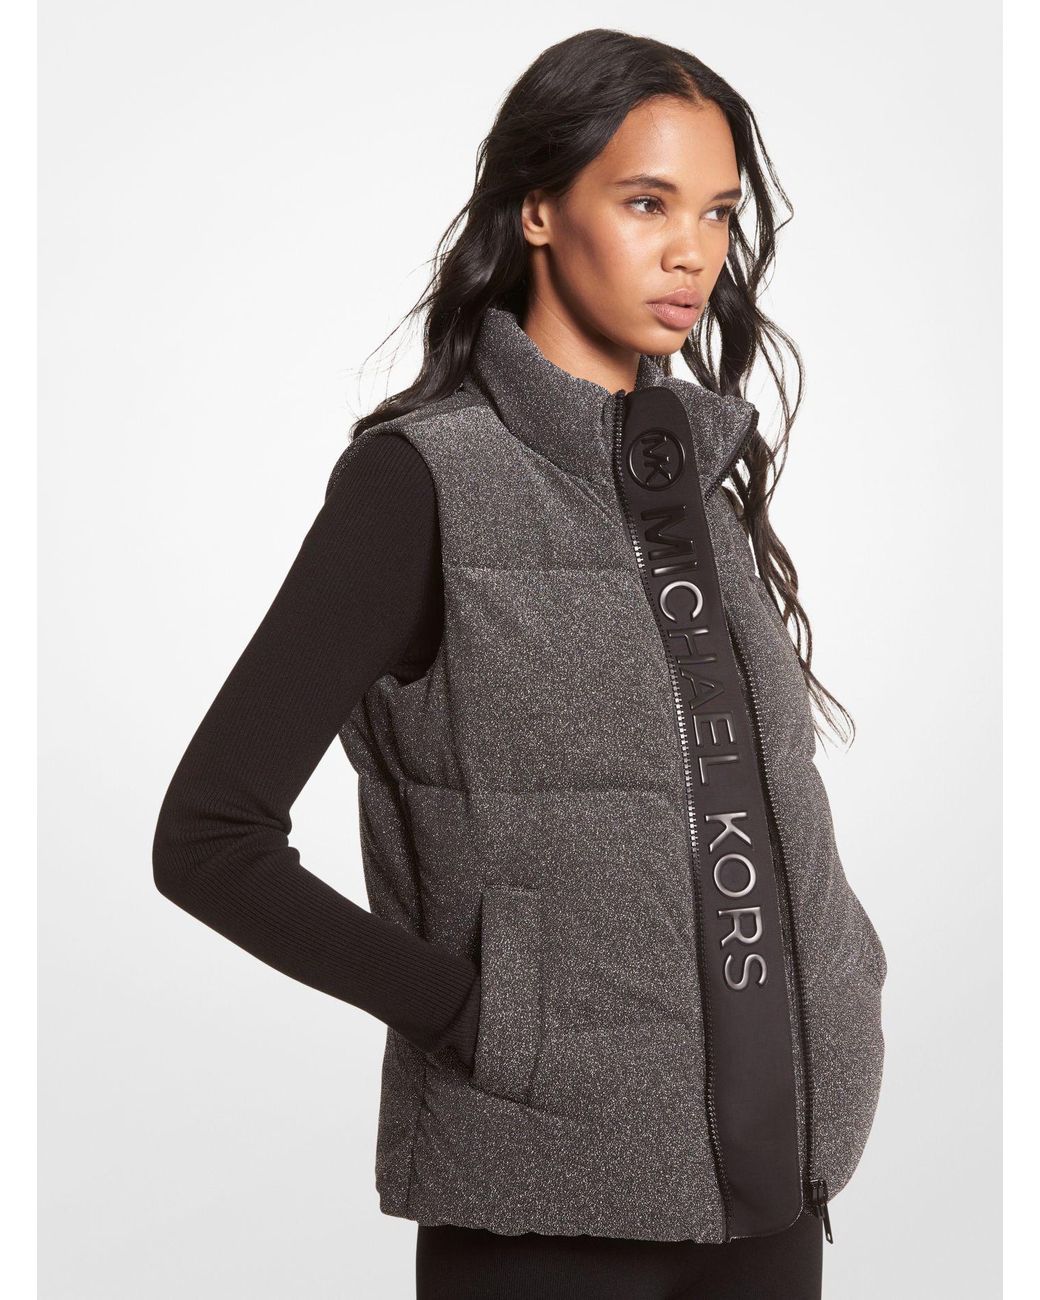 Michael Kors Quilted Metallic Knit Puffer Vest | Lyst